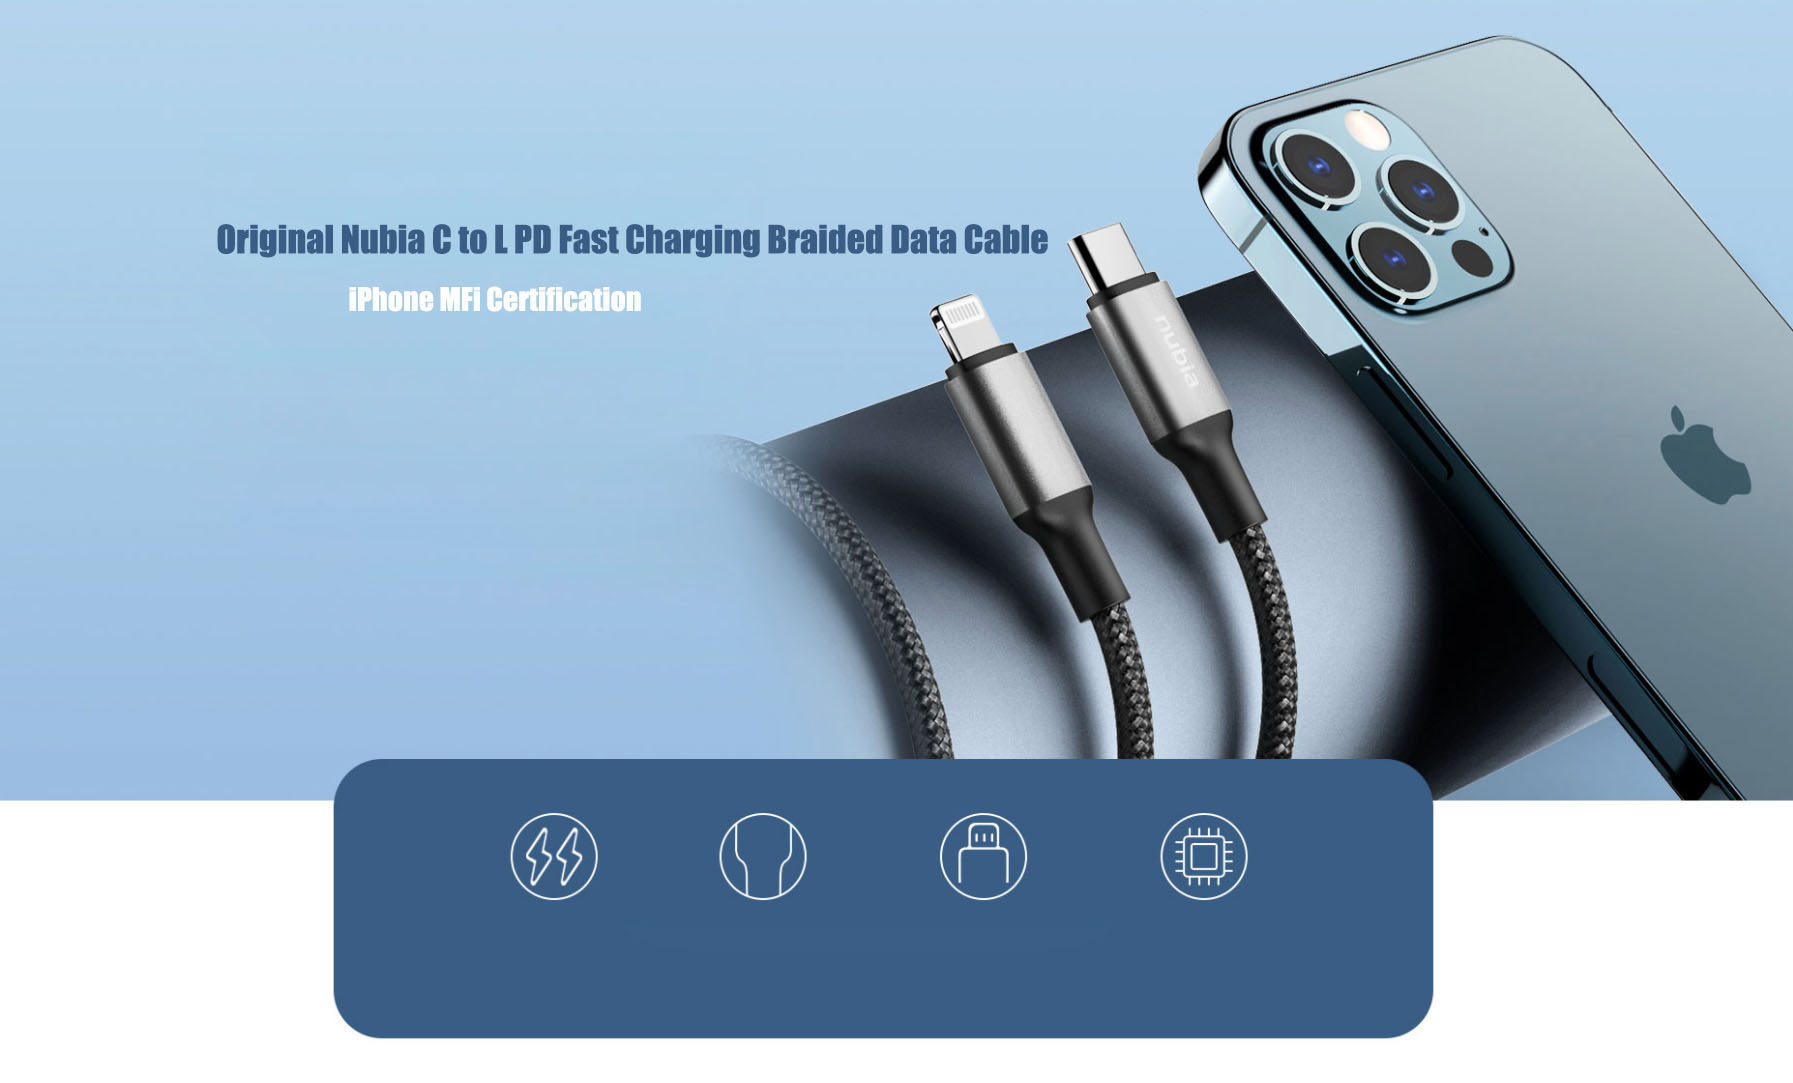 Nubia C to L PD Fast Charging Braided Data Cable